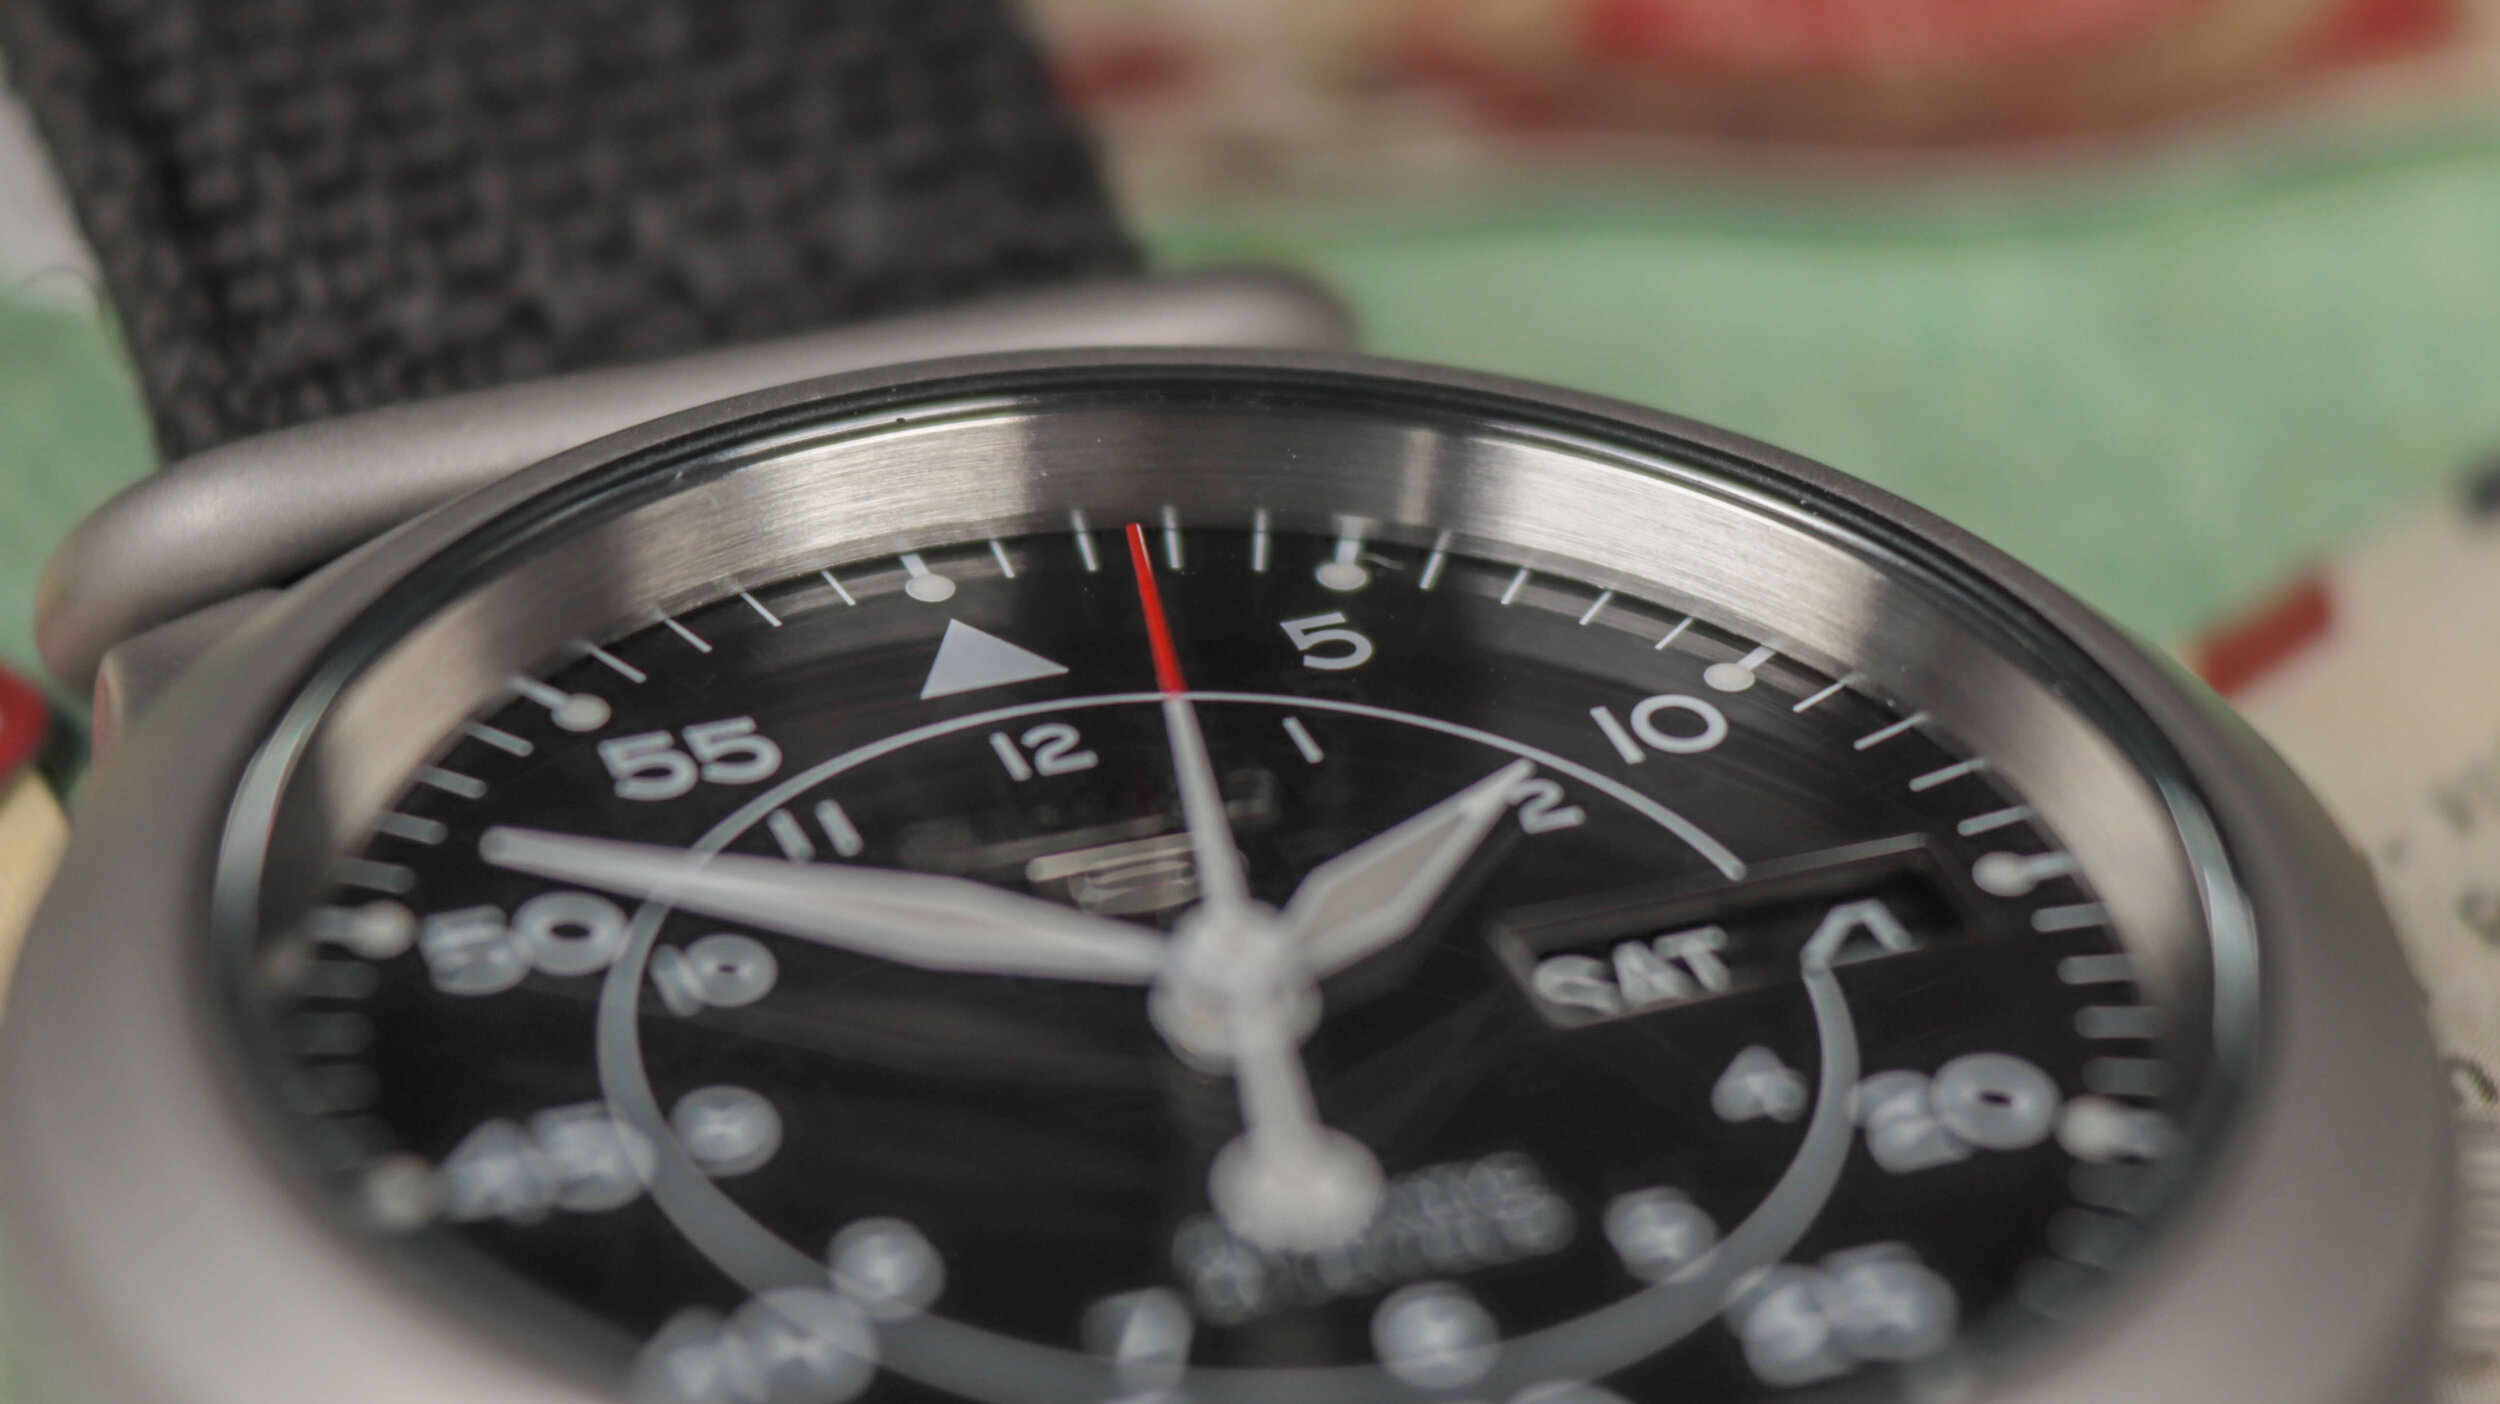 Seiko 5 Military Watch Review (SNK809) - How This Watch Gets You — Watch